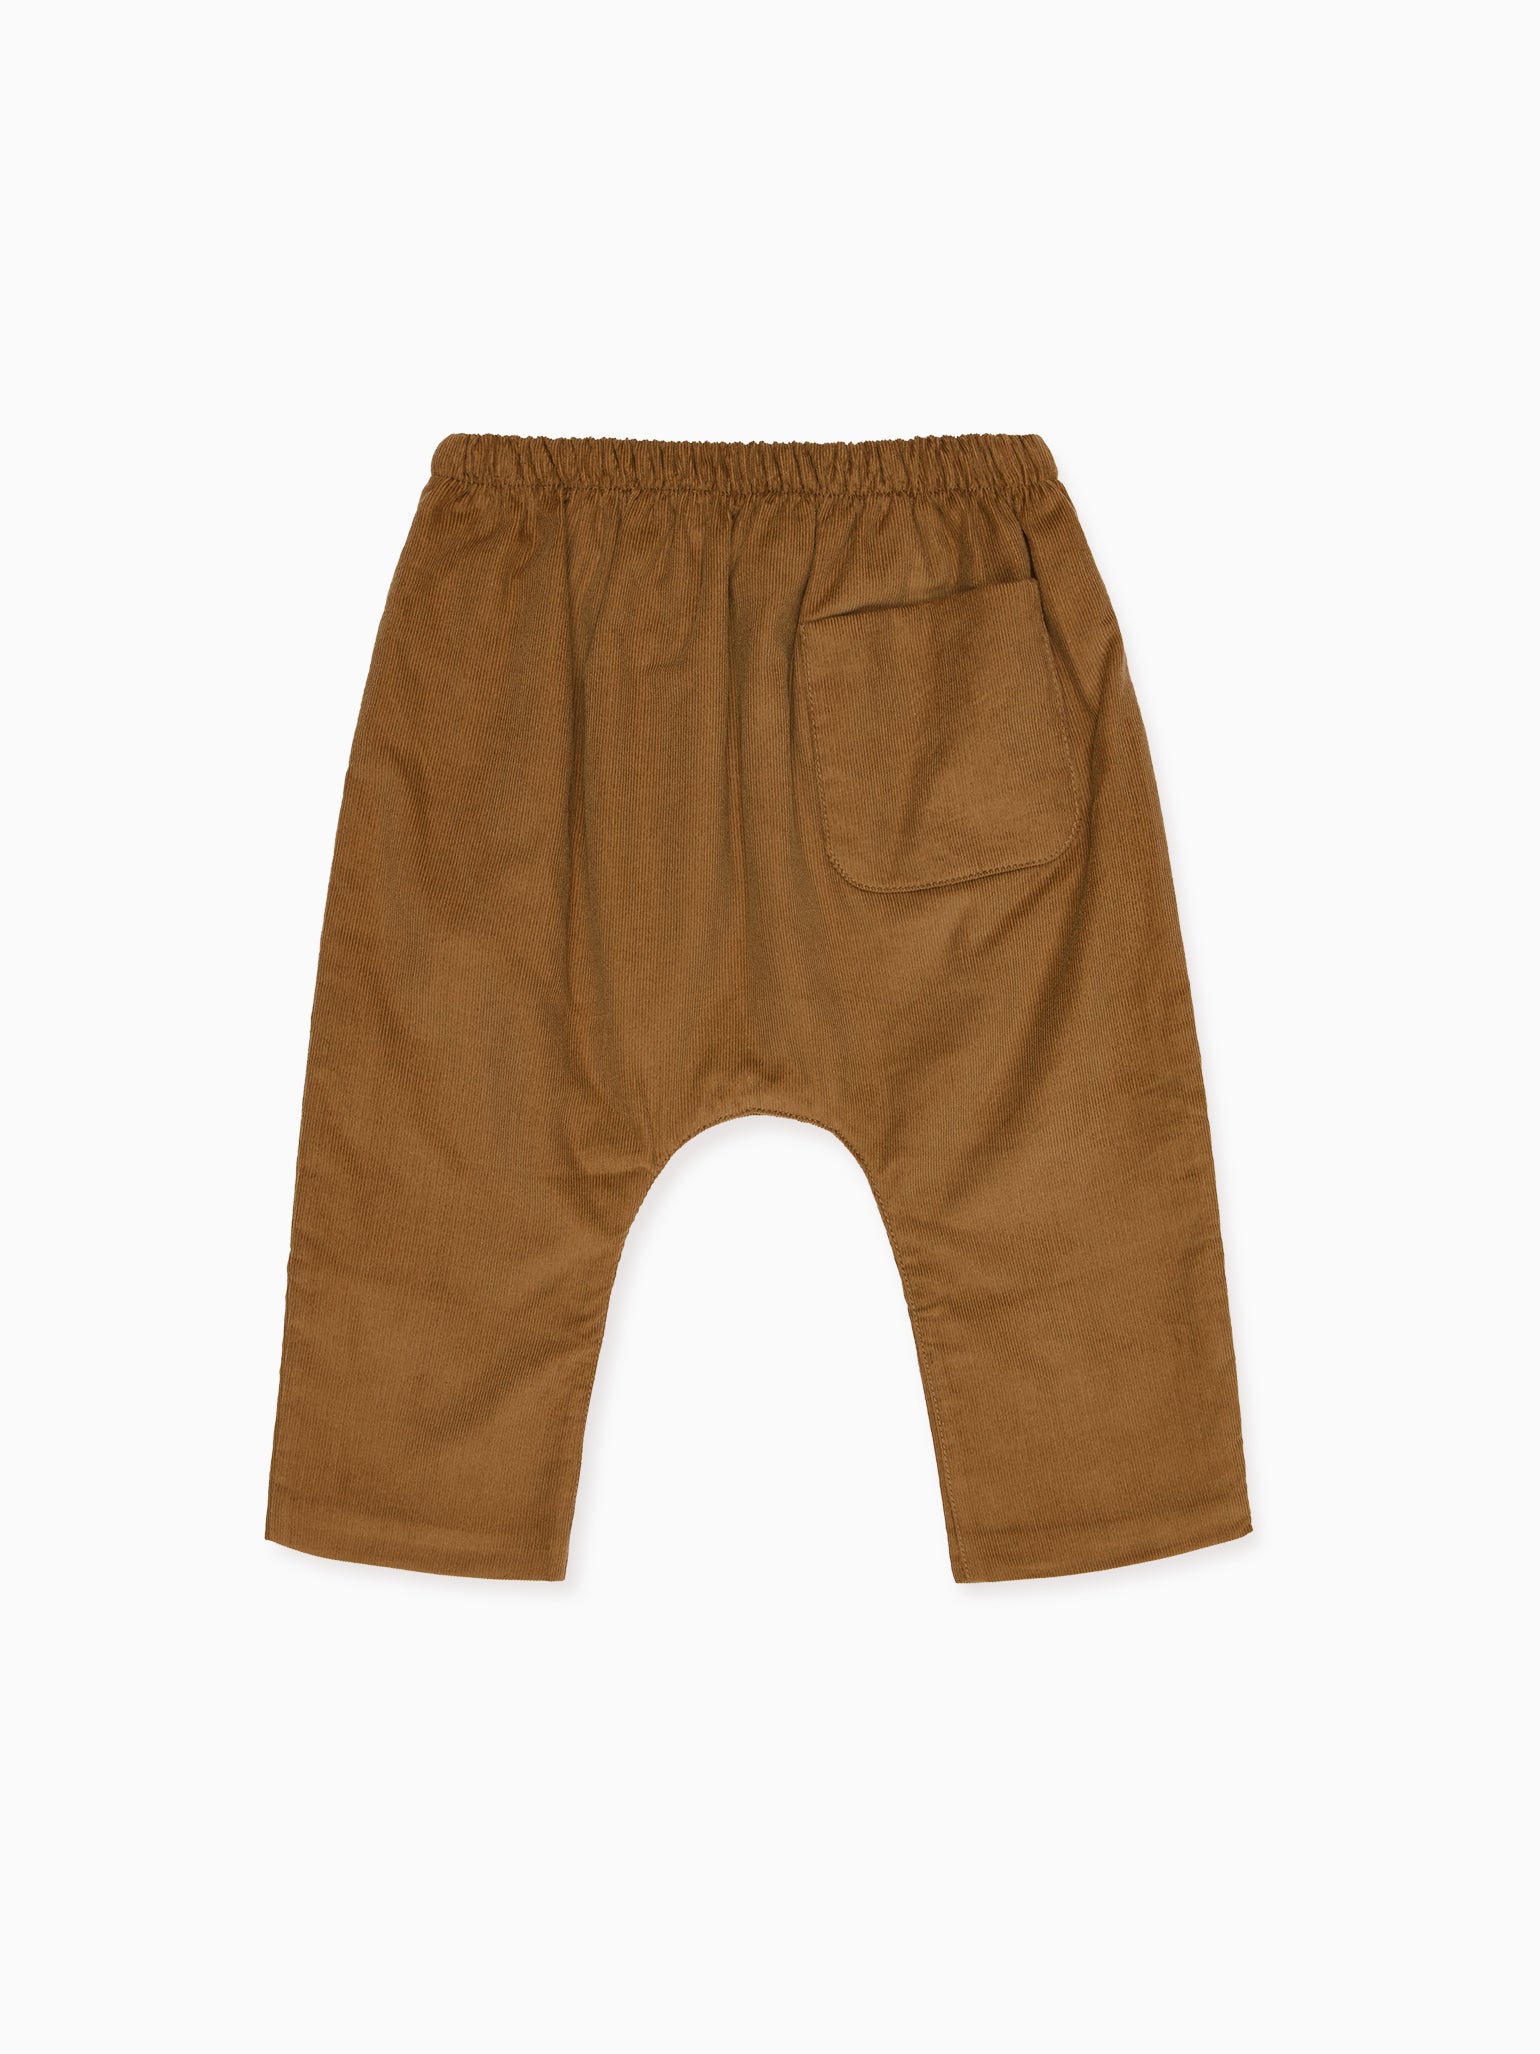 Camel Alex Baby Trousers